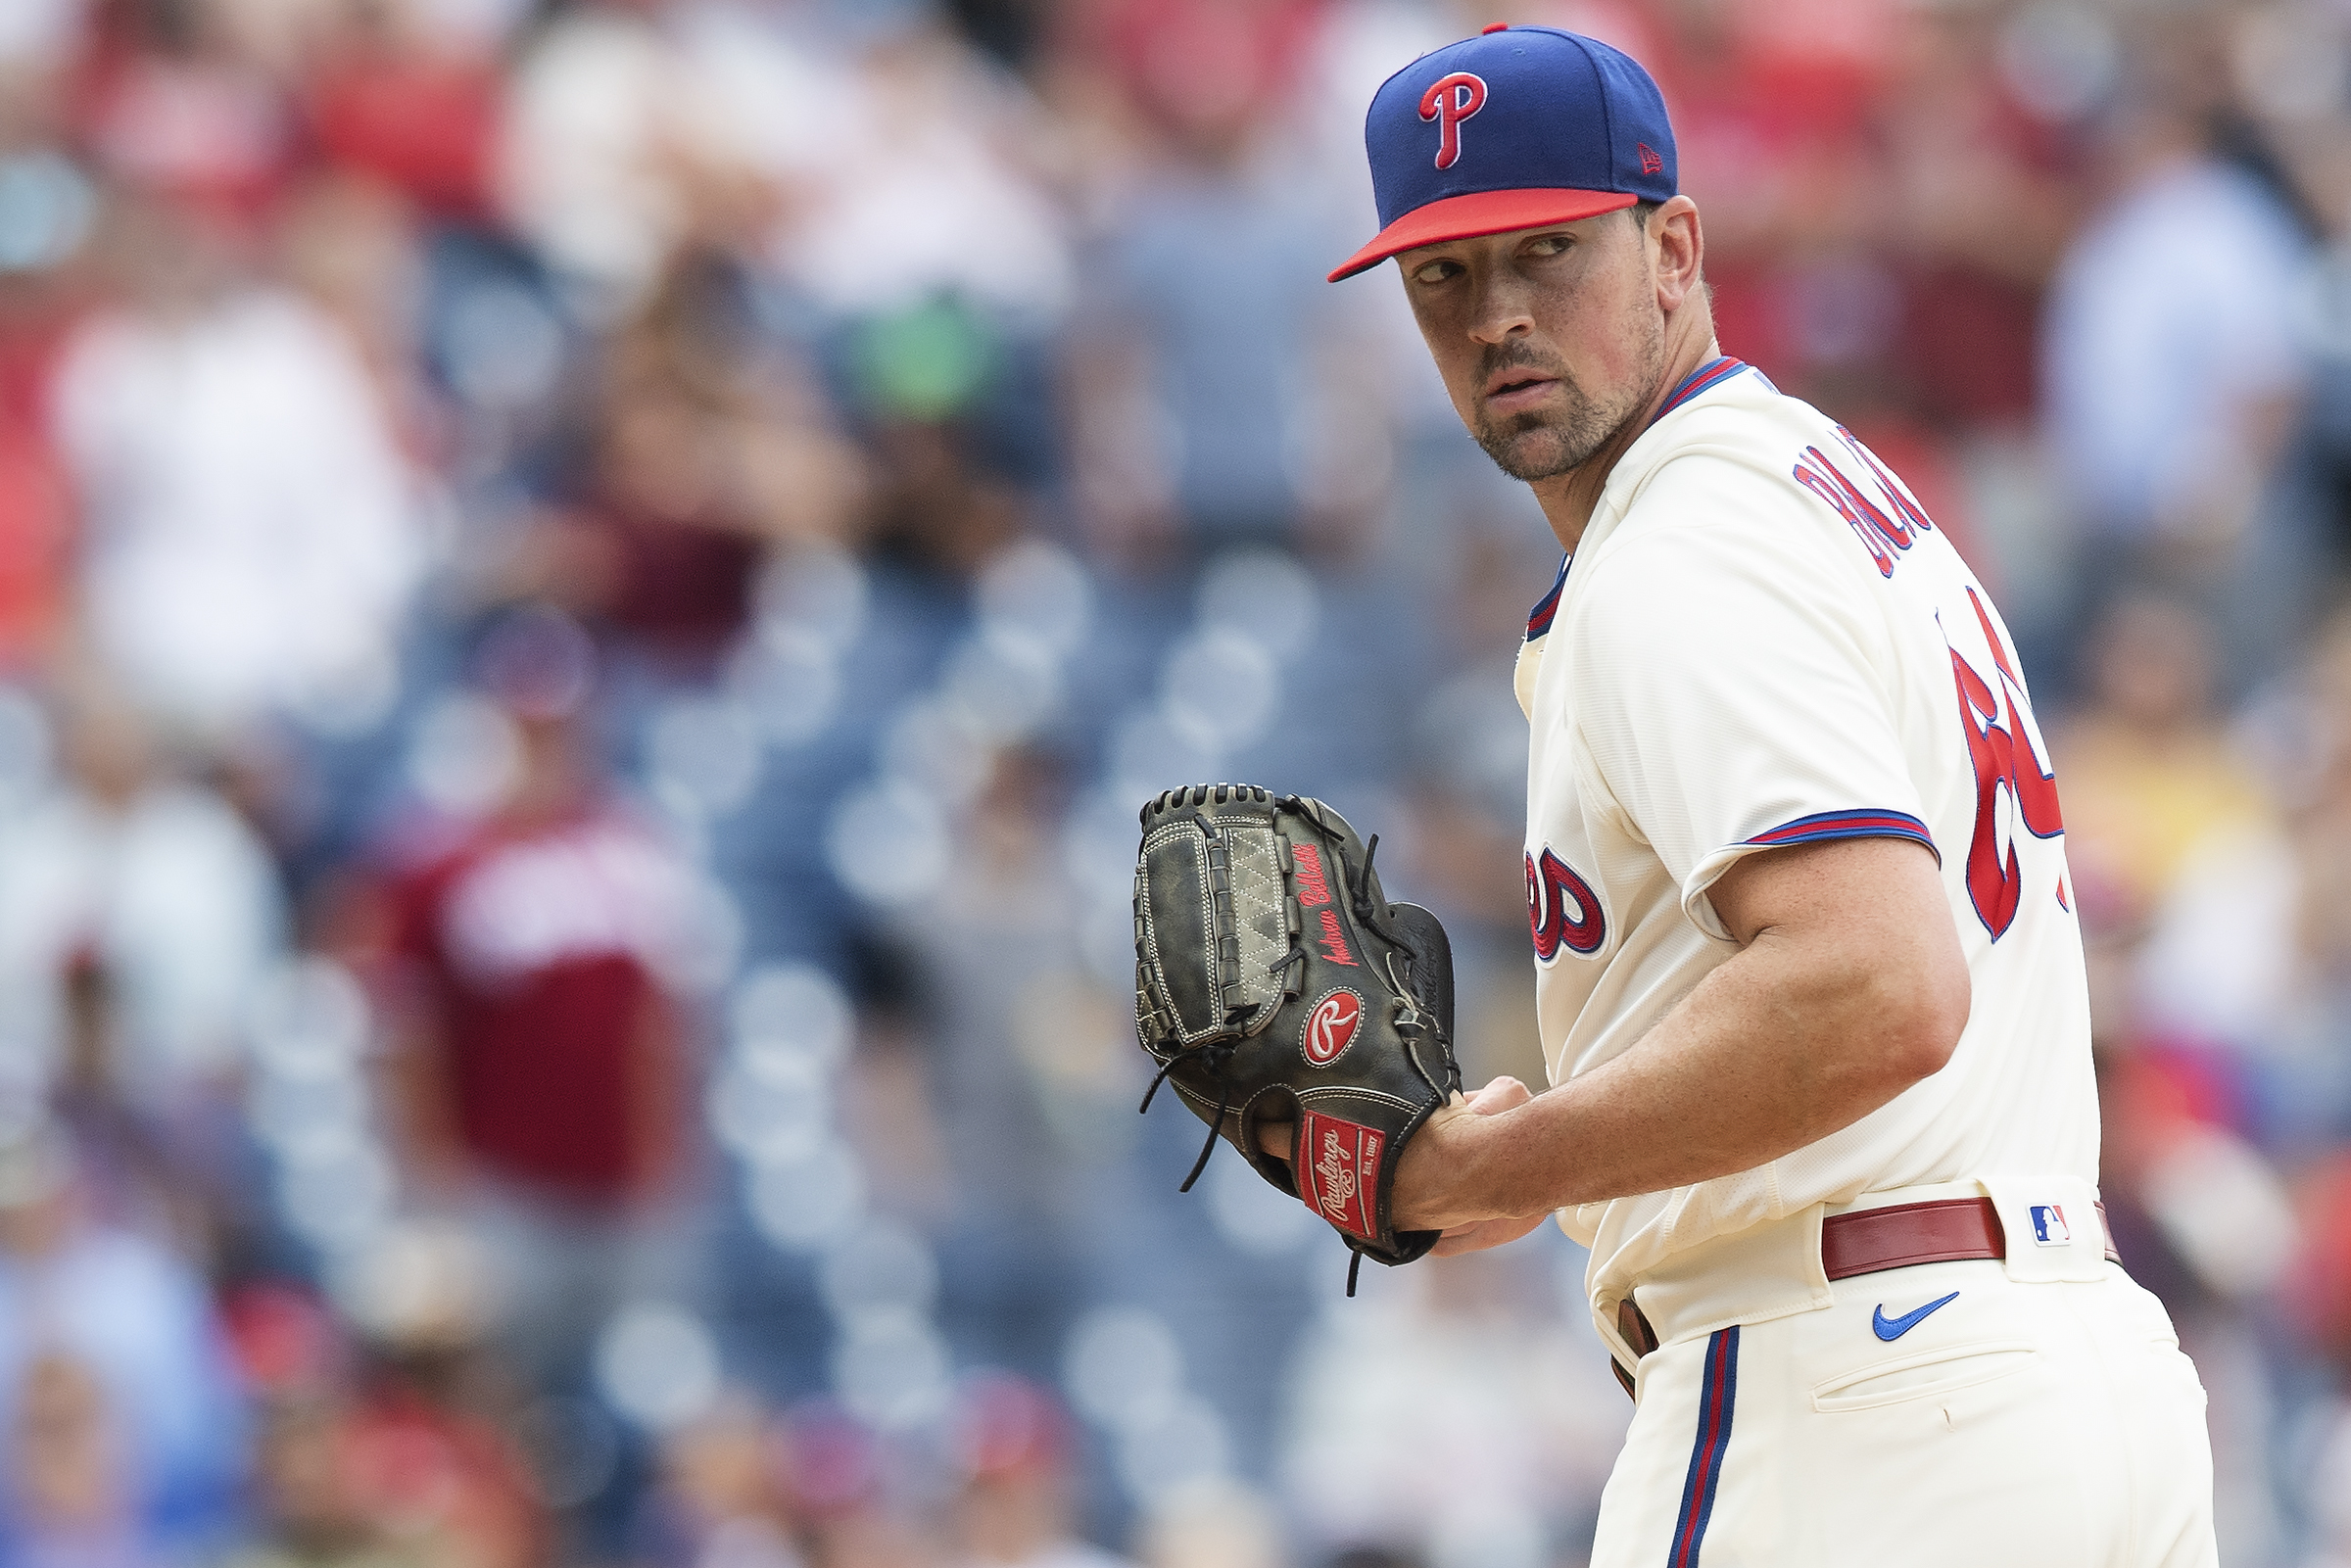 New Phillies reliever Matt Strahm brings uncommonly varied